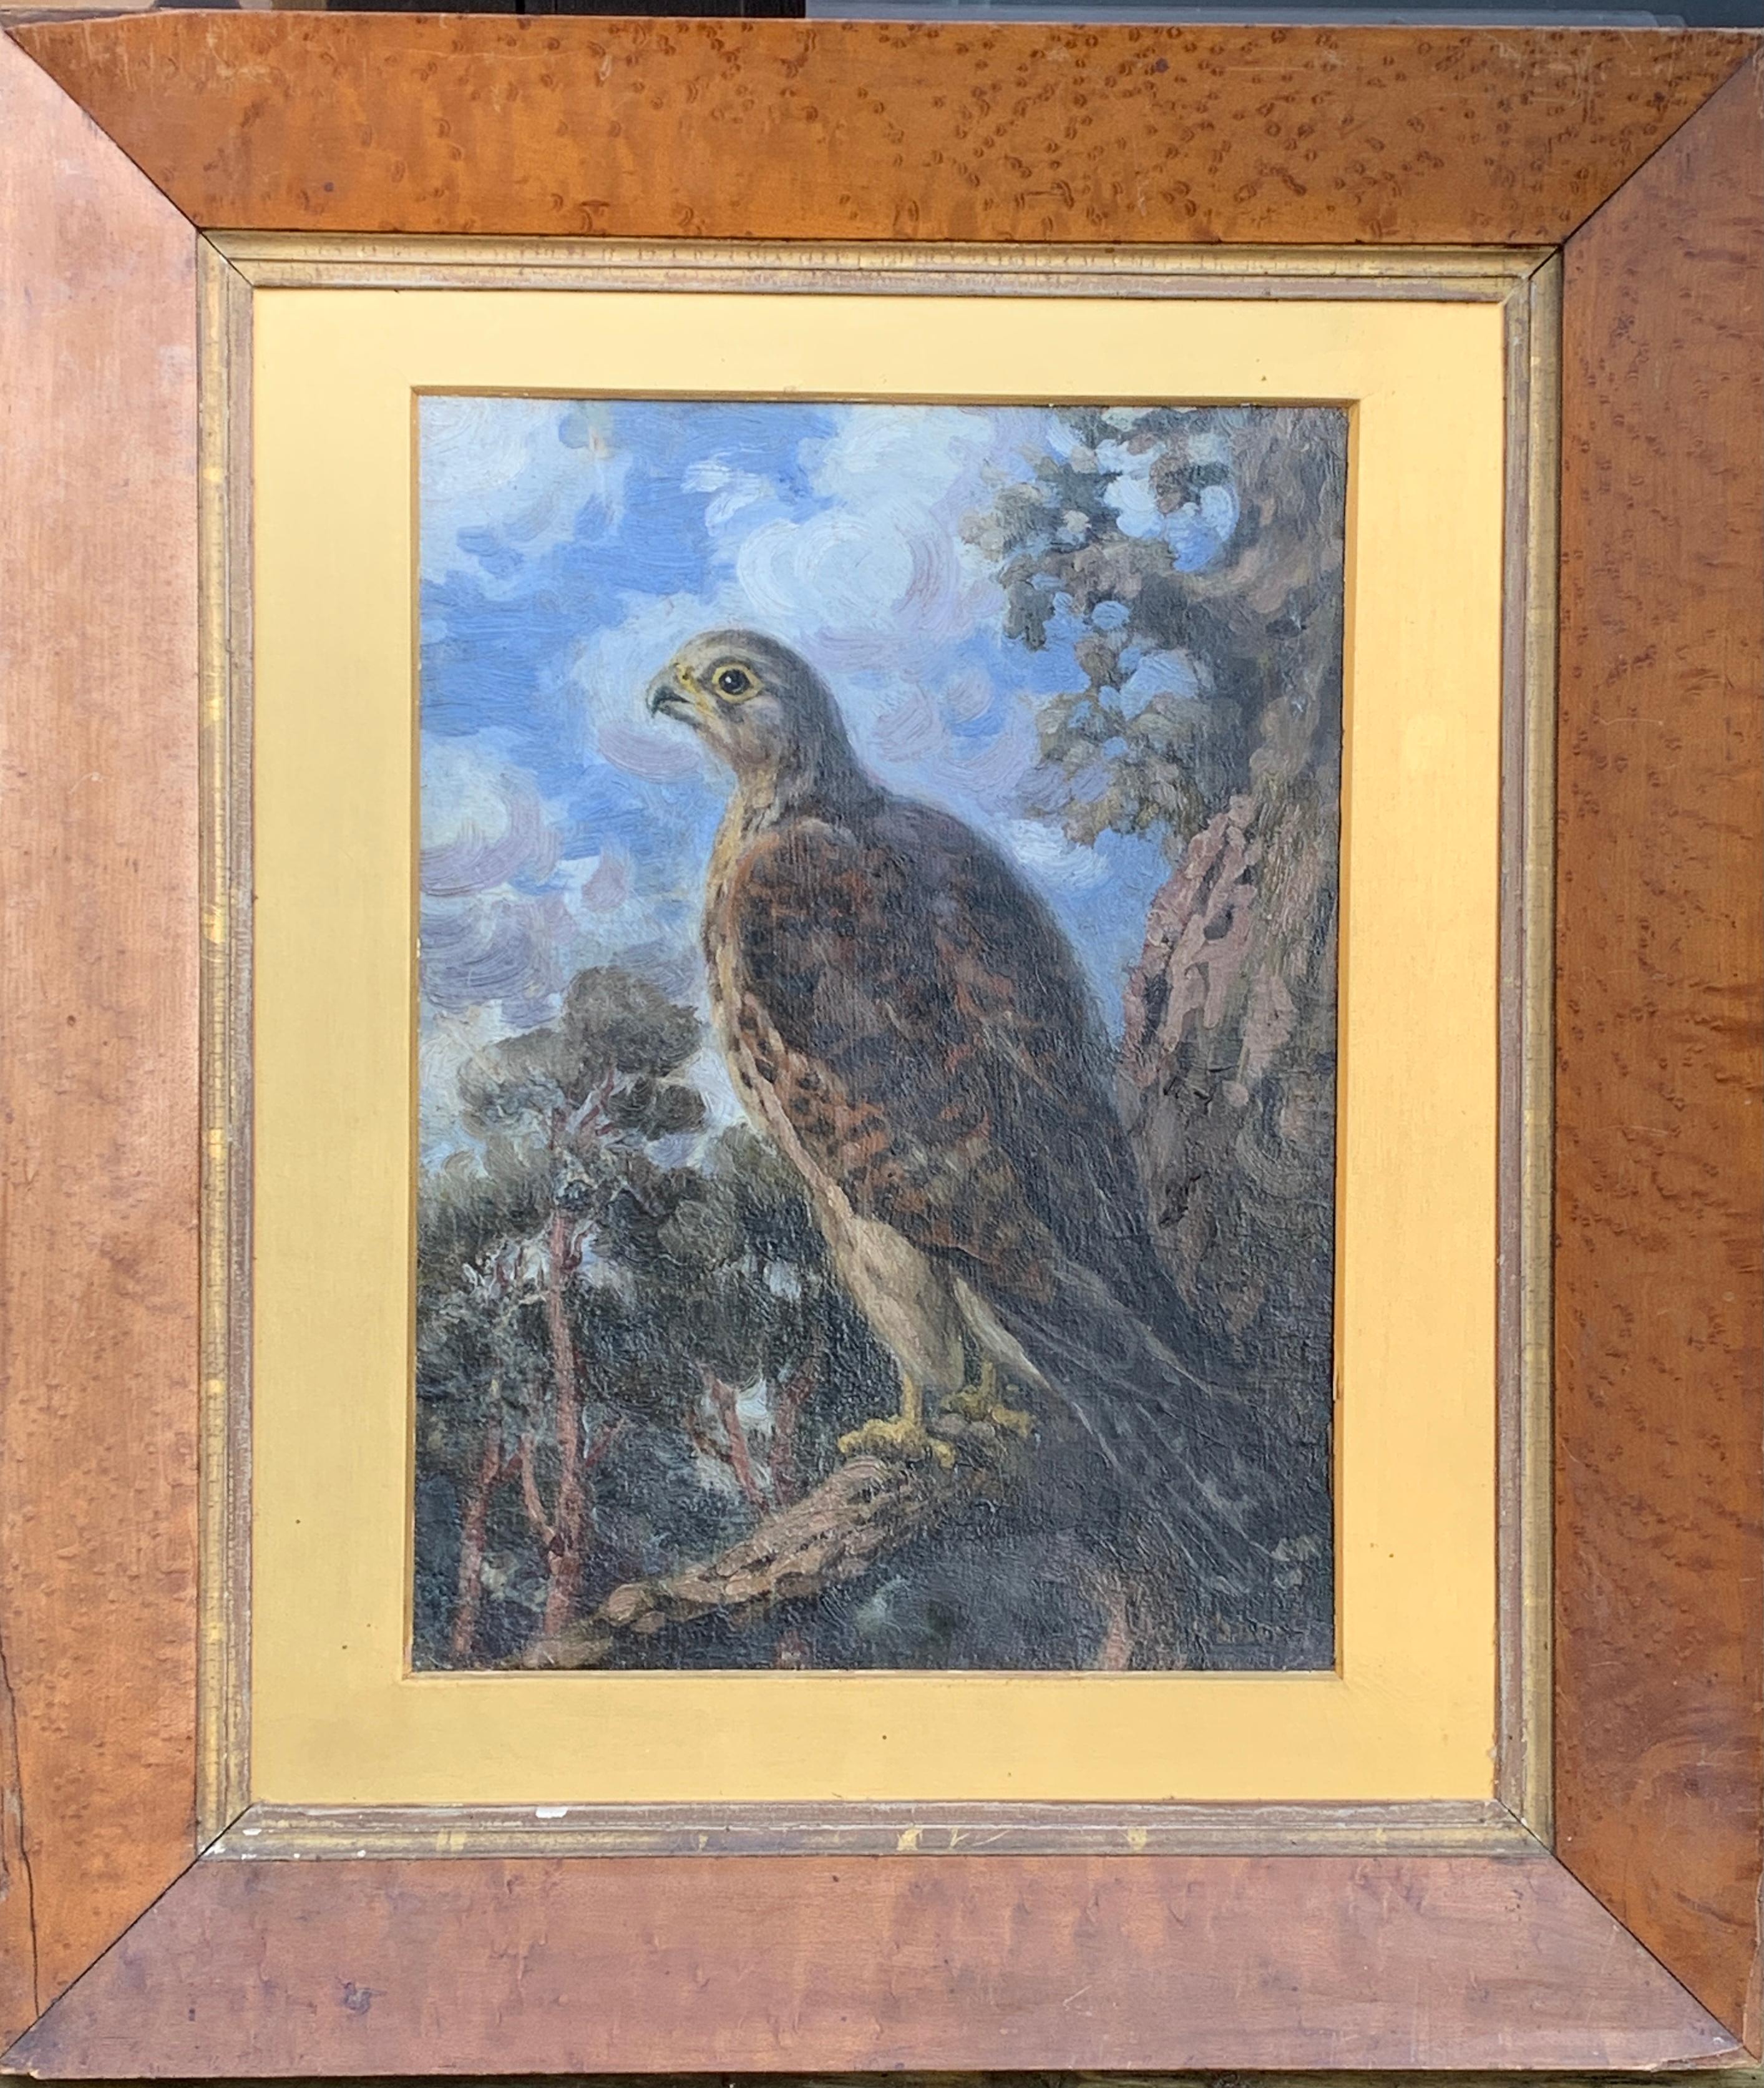 Early 20th century English portrait oil of a Falcon hunting bird in a landscape.